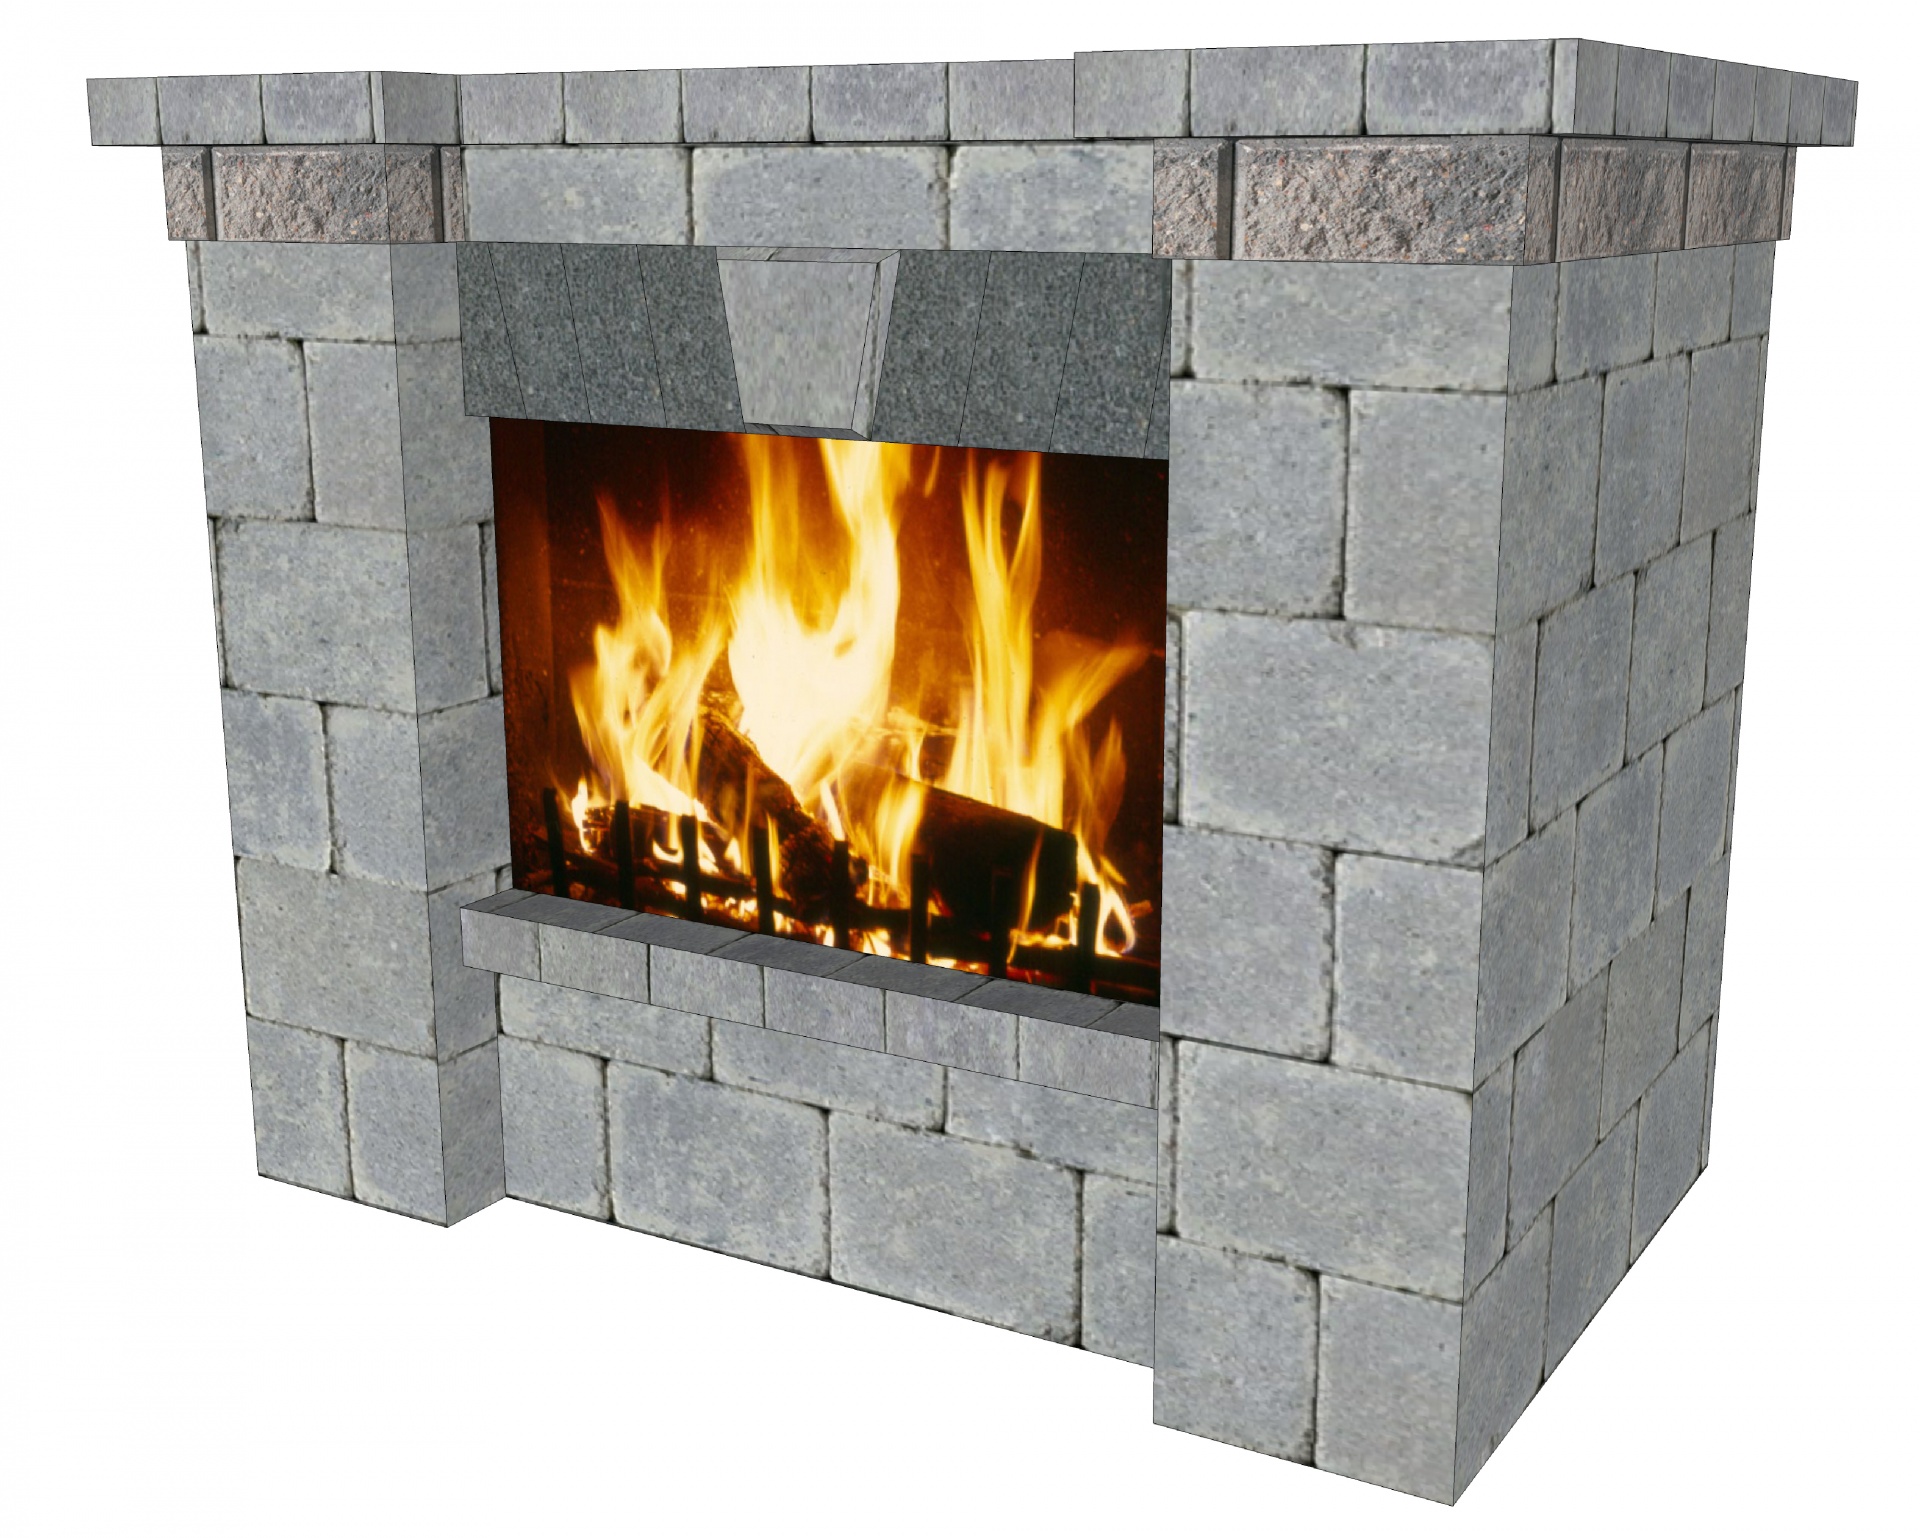 3d drawing of a gas fireplace on white